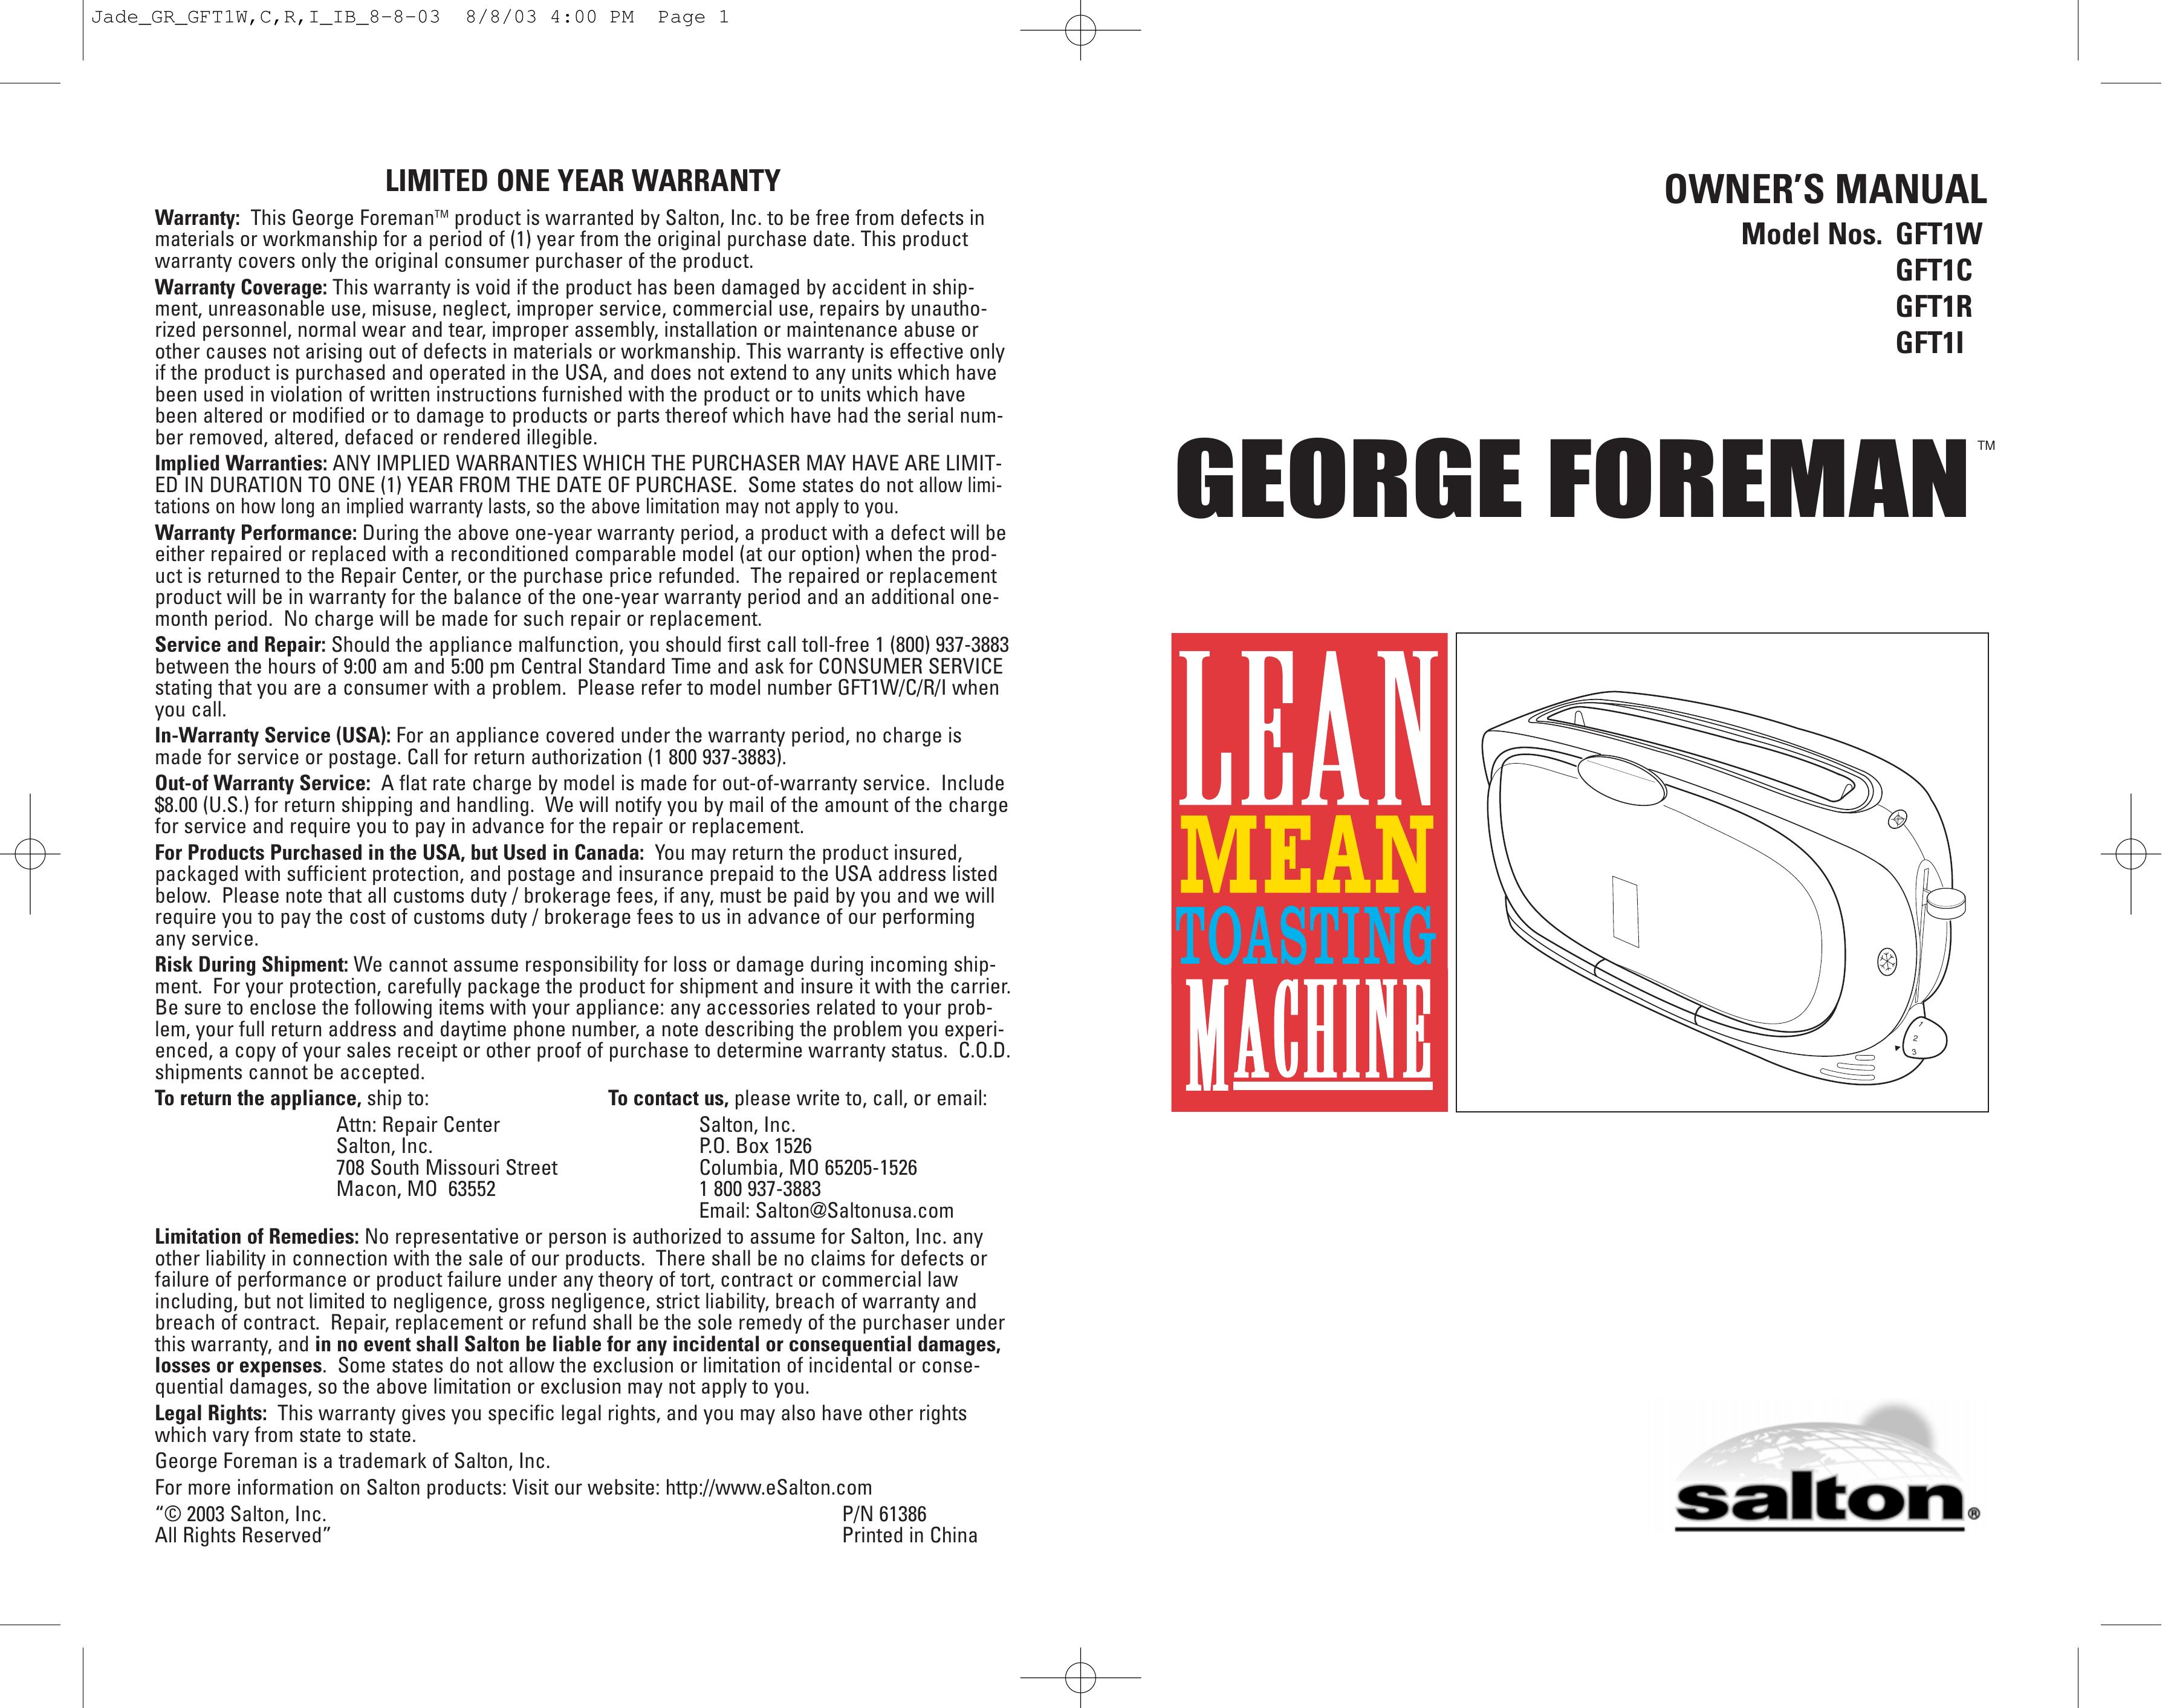 George Foreman GFT1W Toaster User Manual